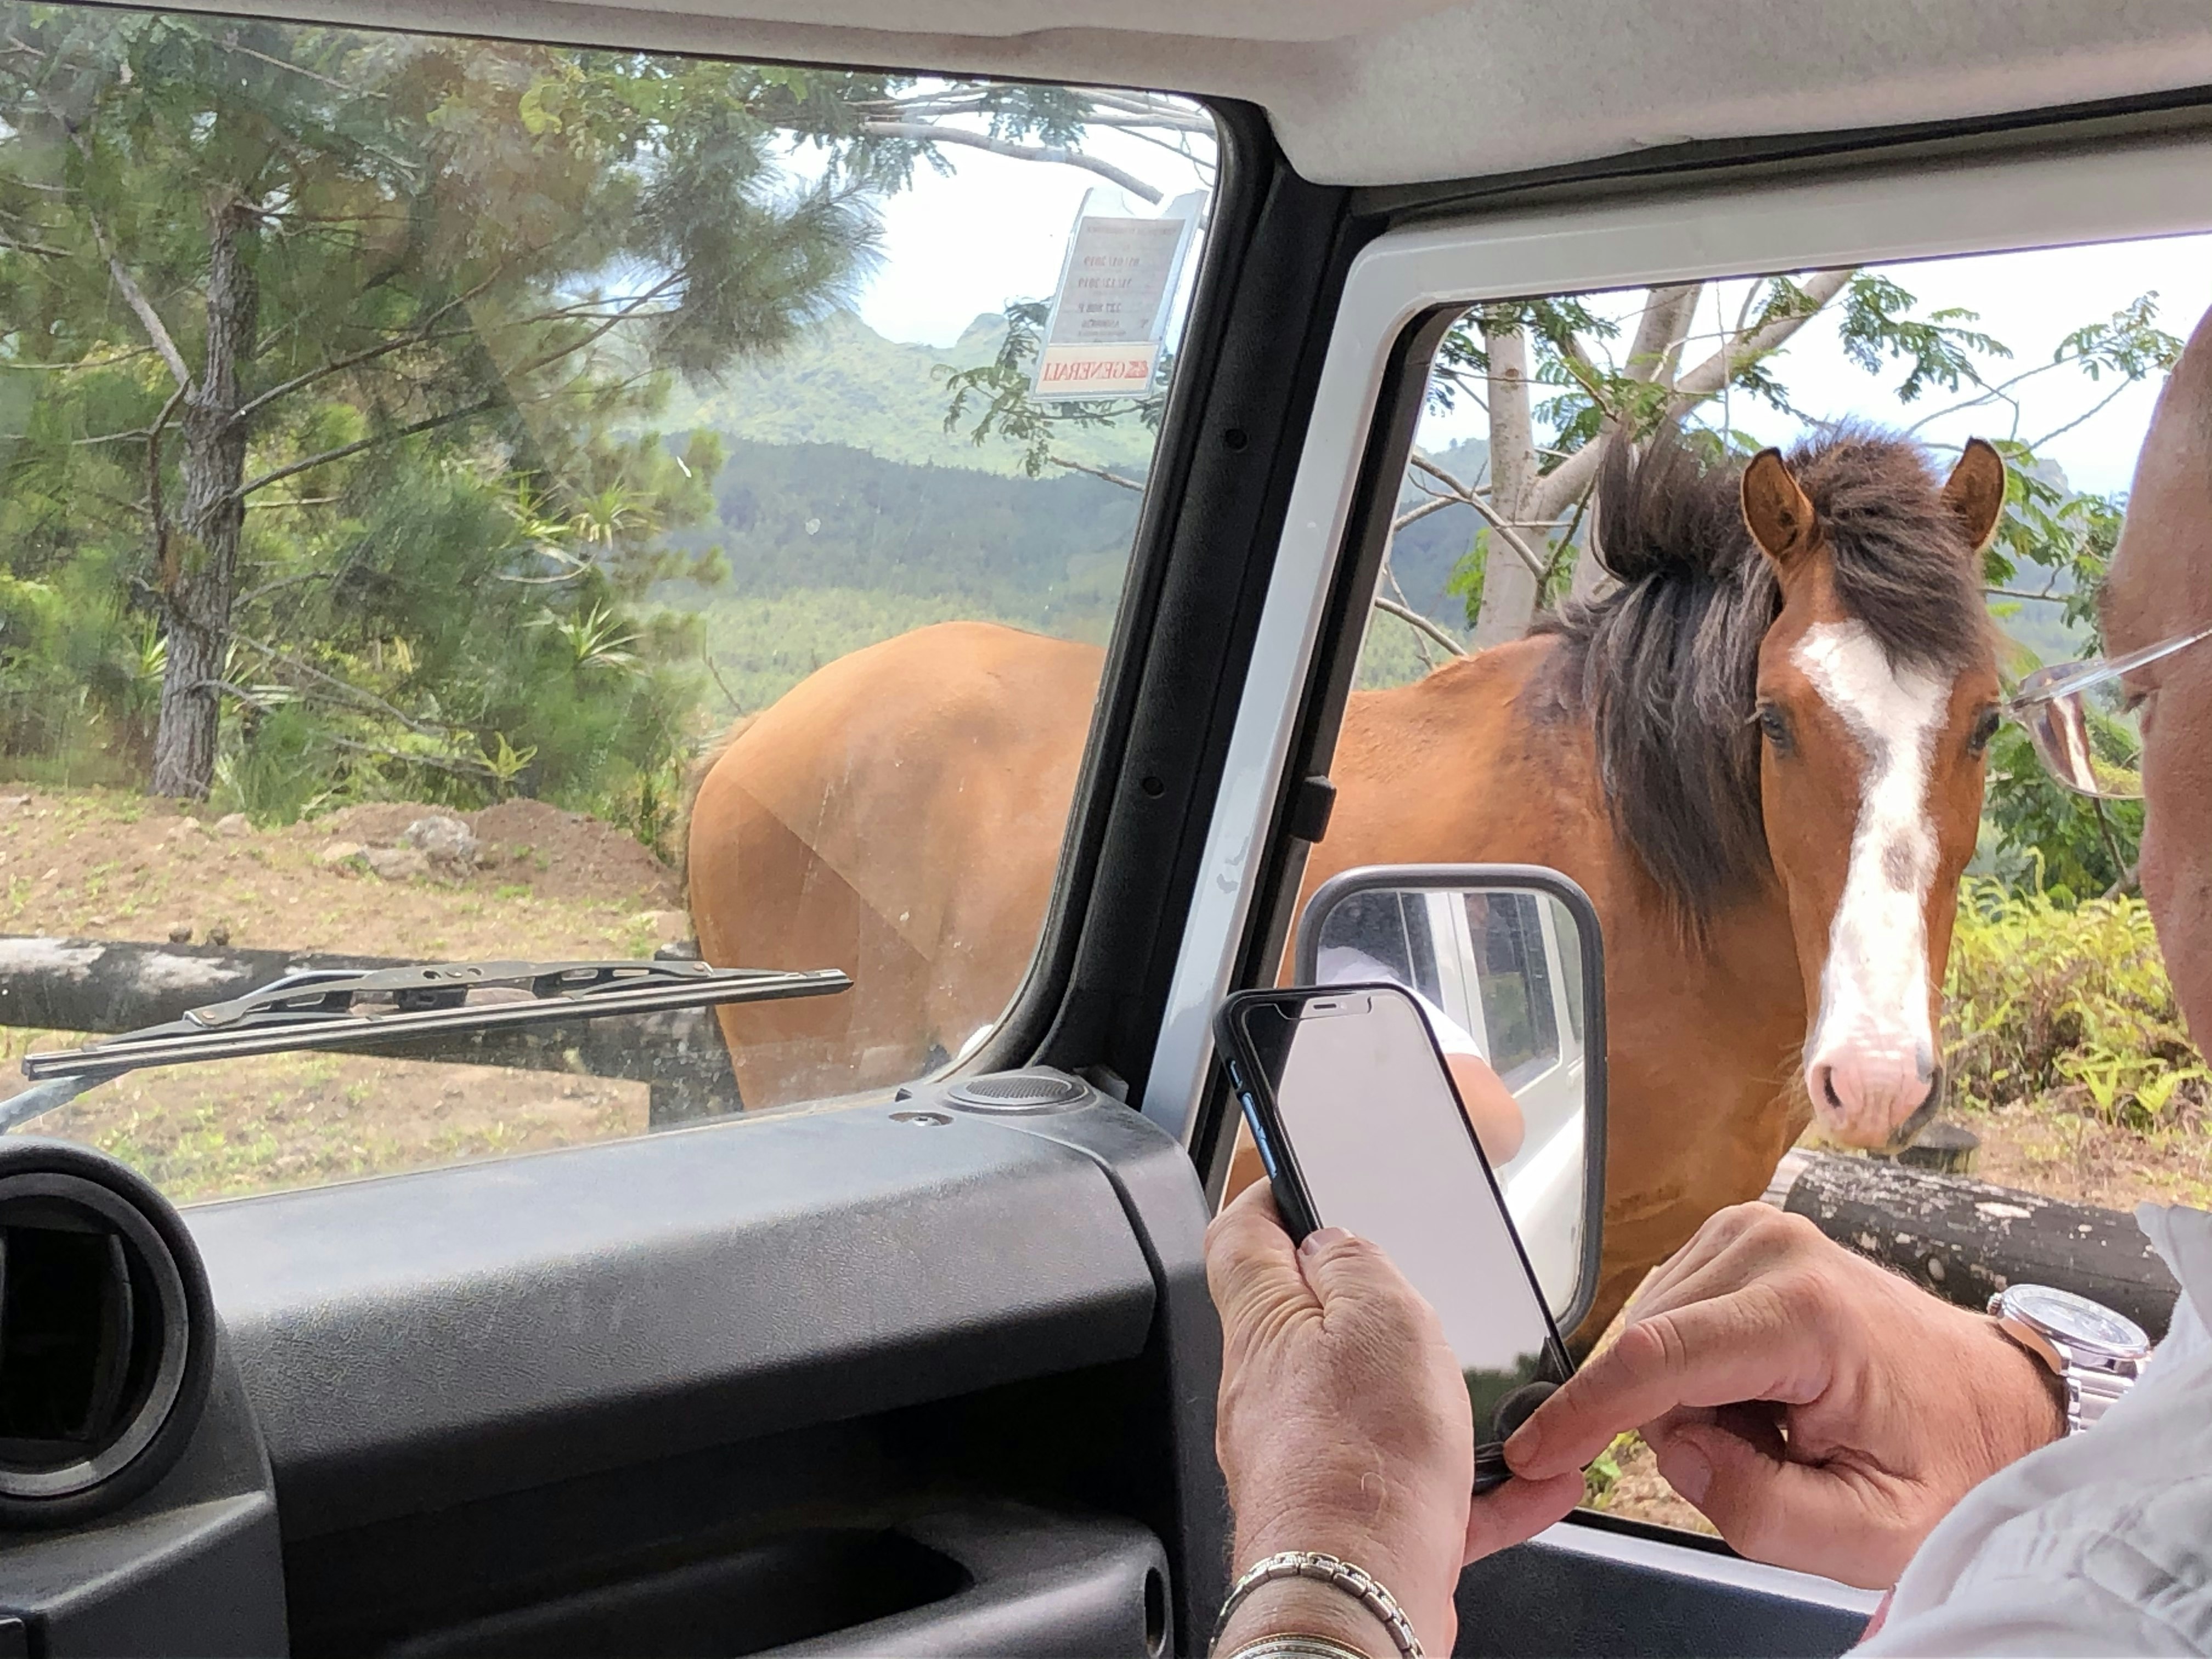 Wild horses gather next to the open window of a car in Nuku Hiva